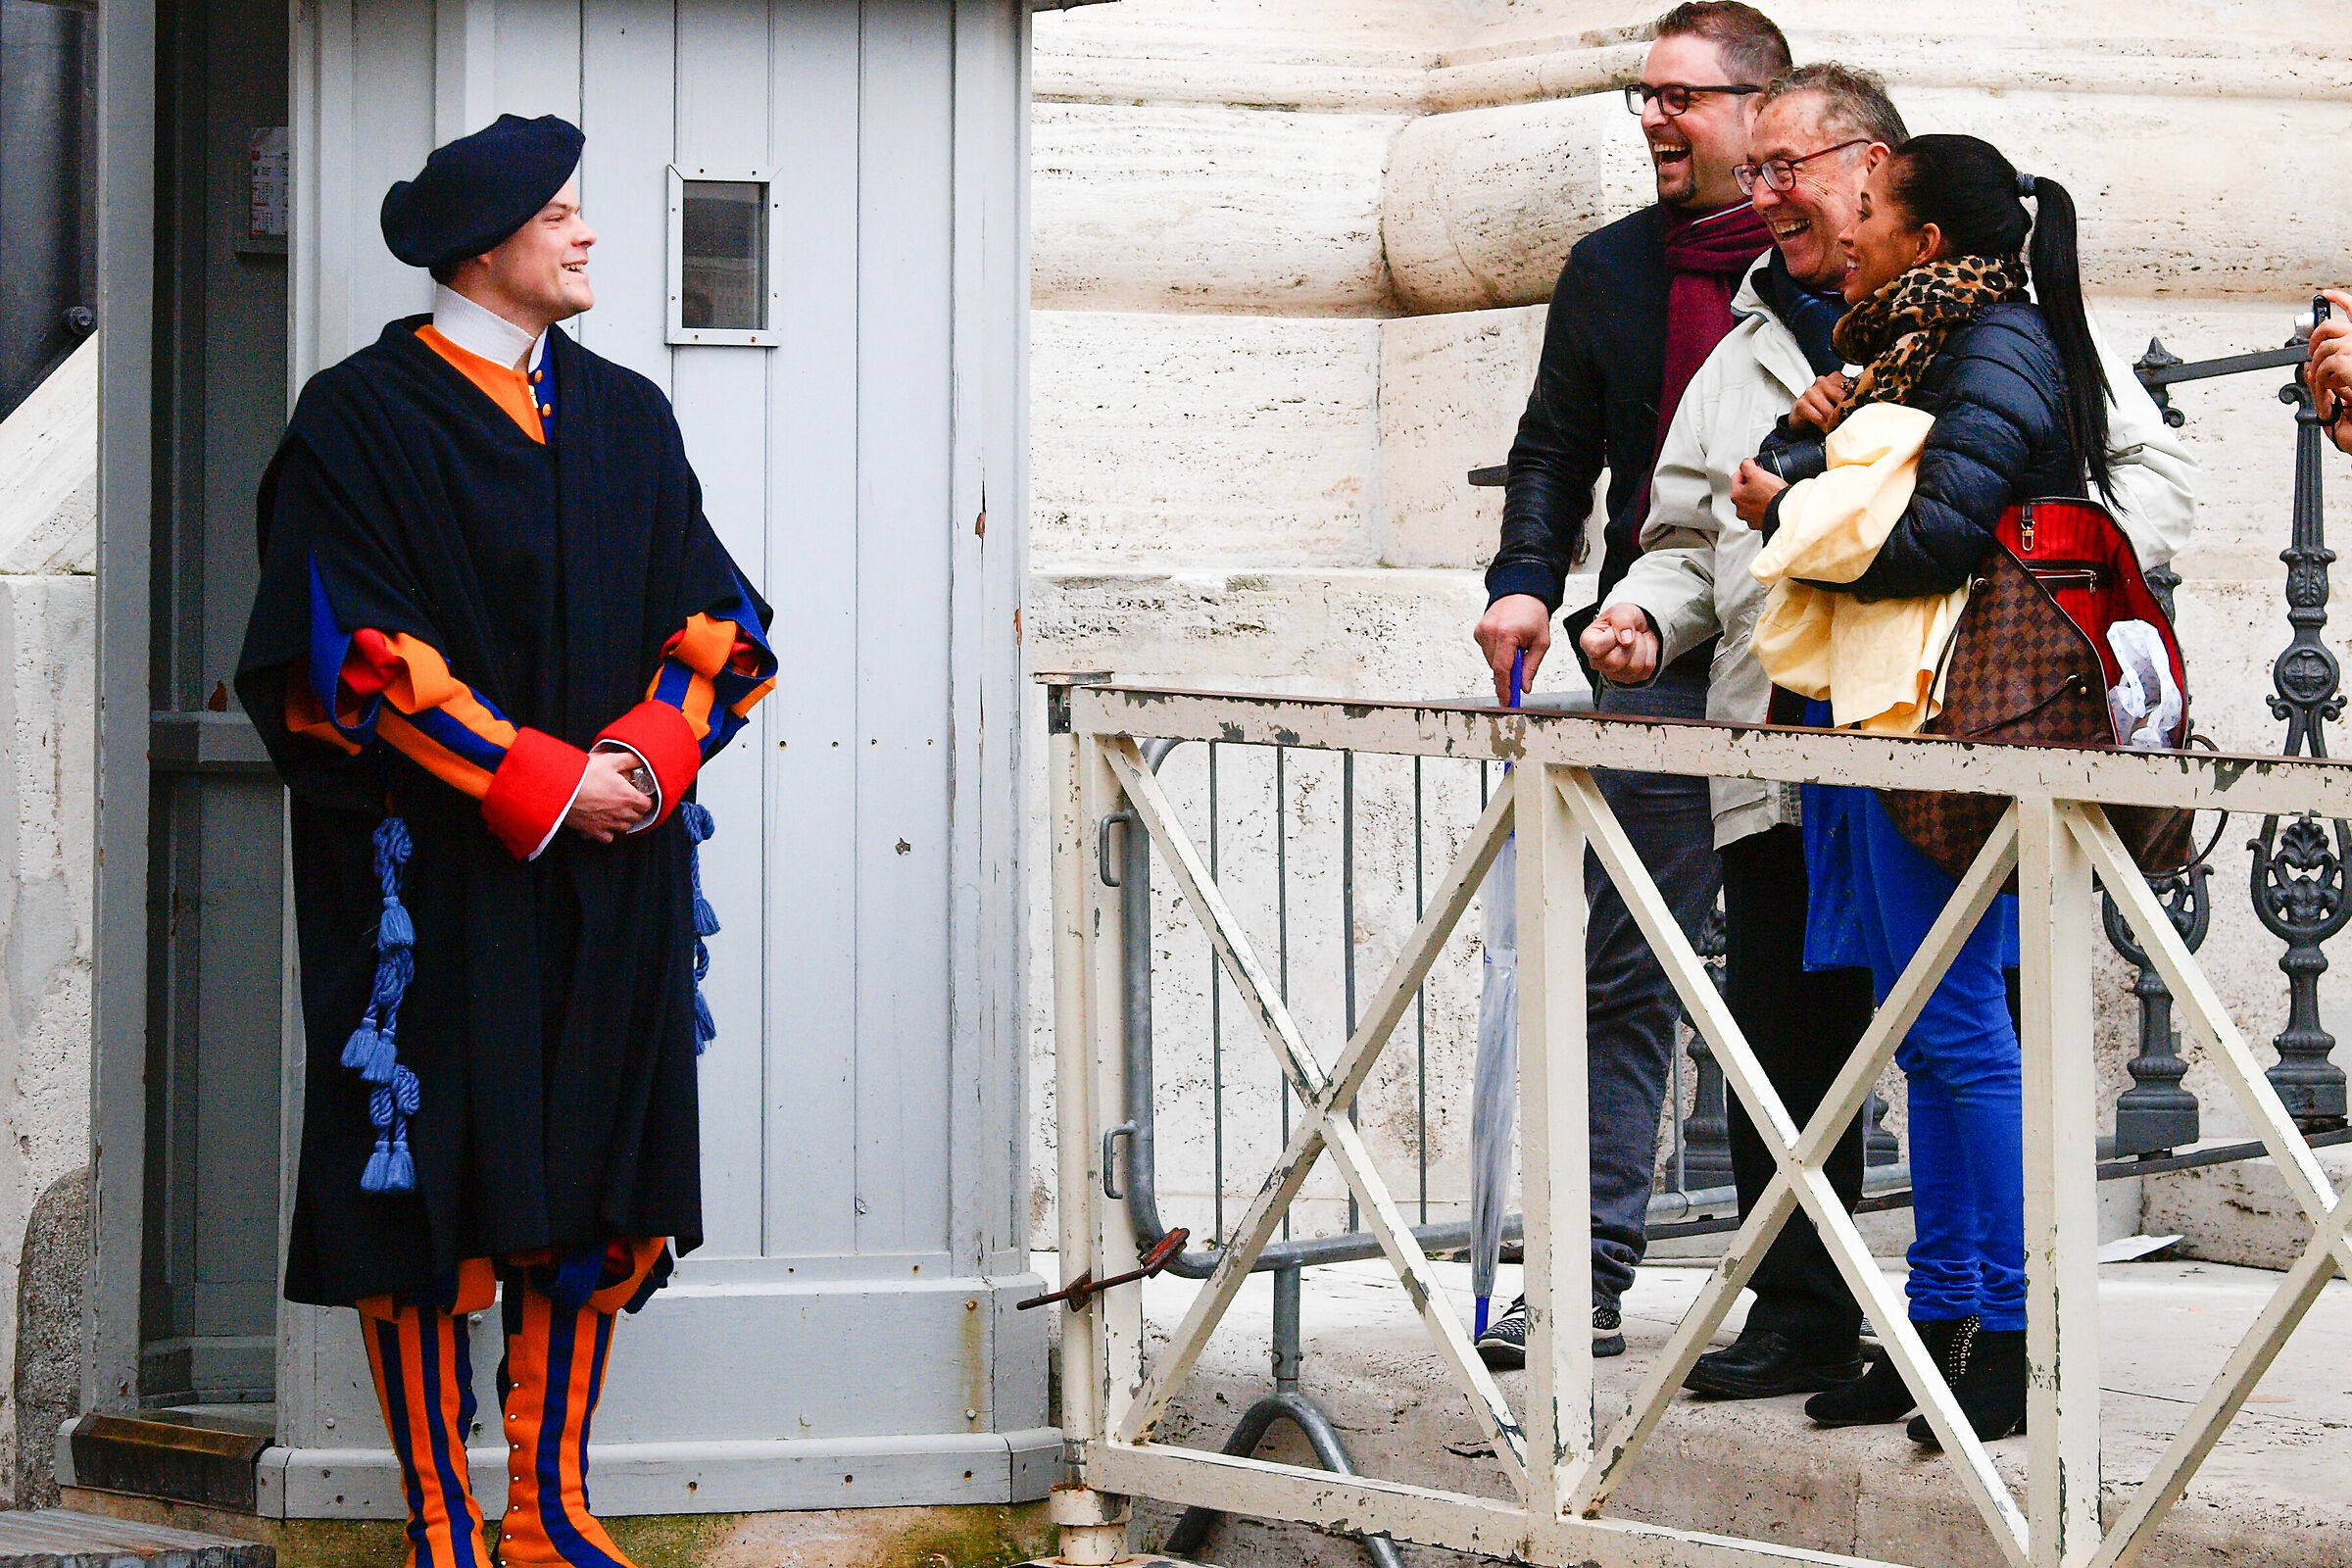 Even the Swiss guards sometimes laugh!...